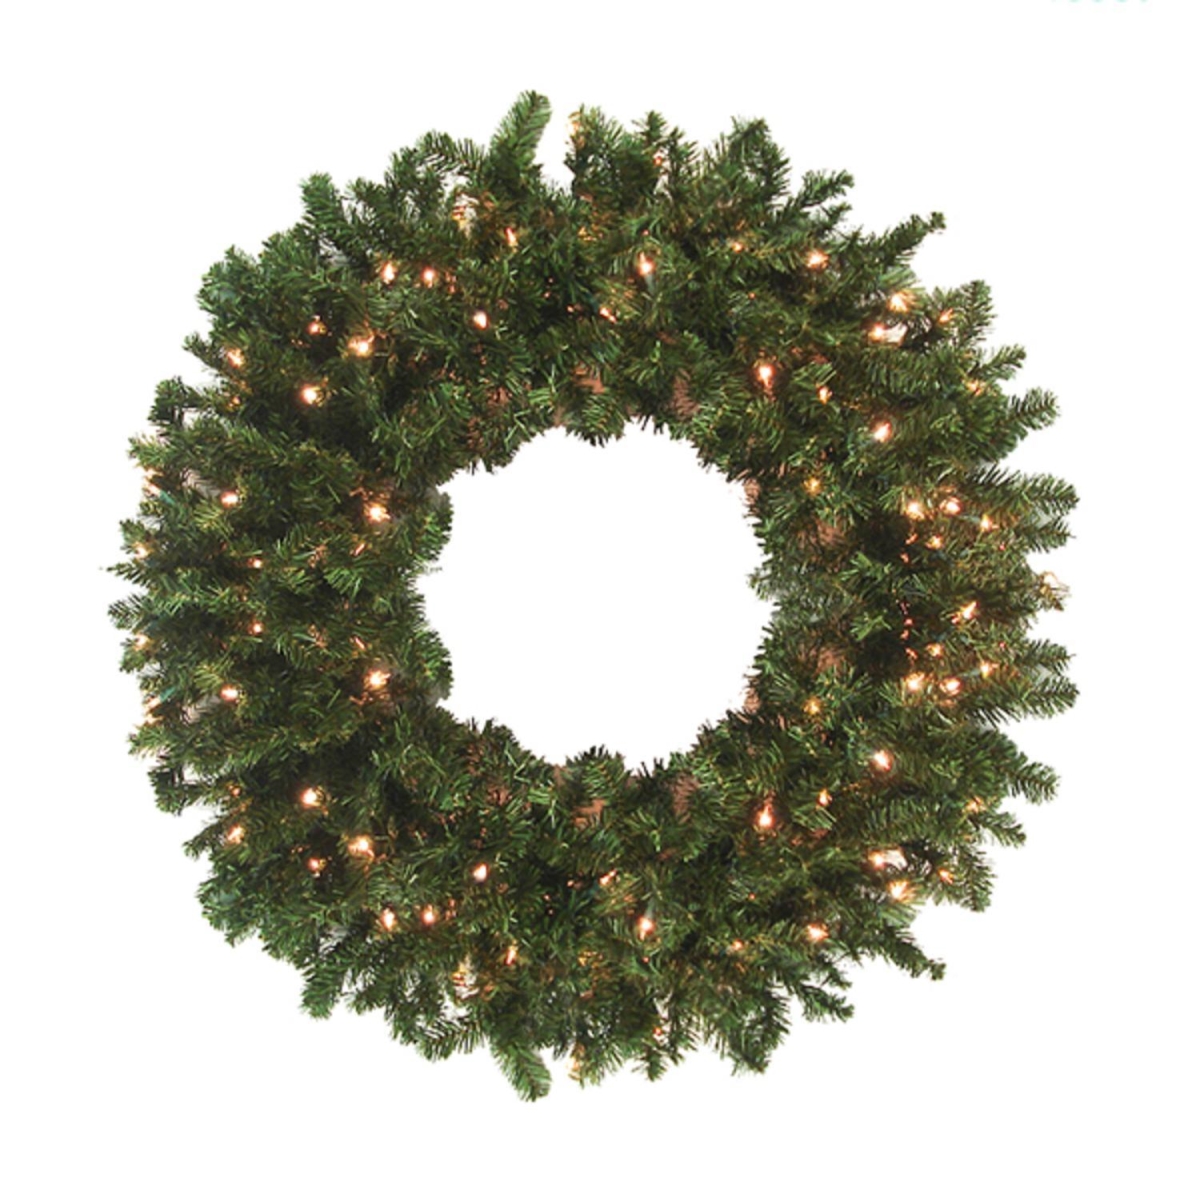 Northlight 32632676 12 ft. Pre-Lit High Sierra Pine Commercial Artificial Christmas Wreath - Clear Lights